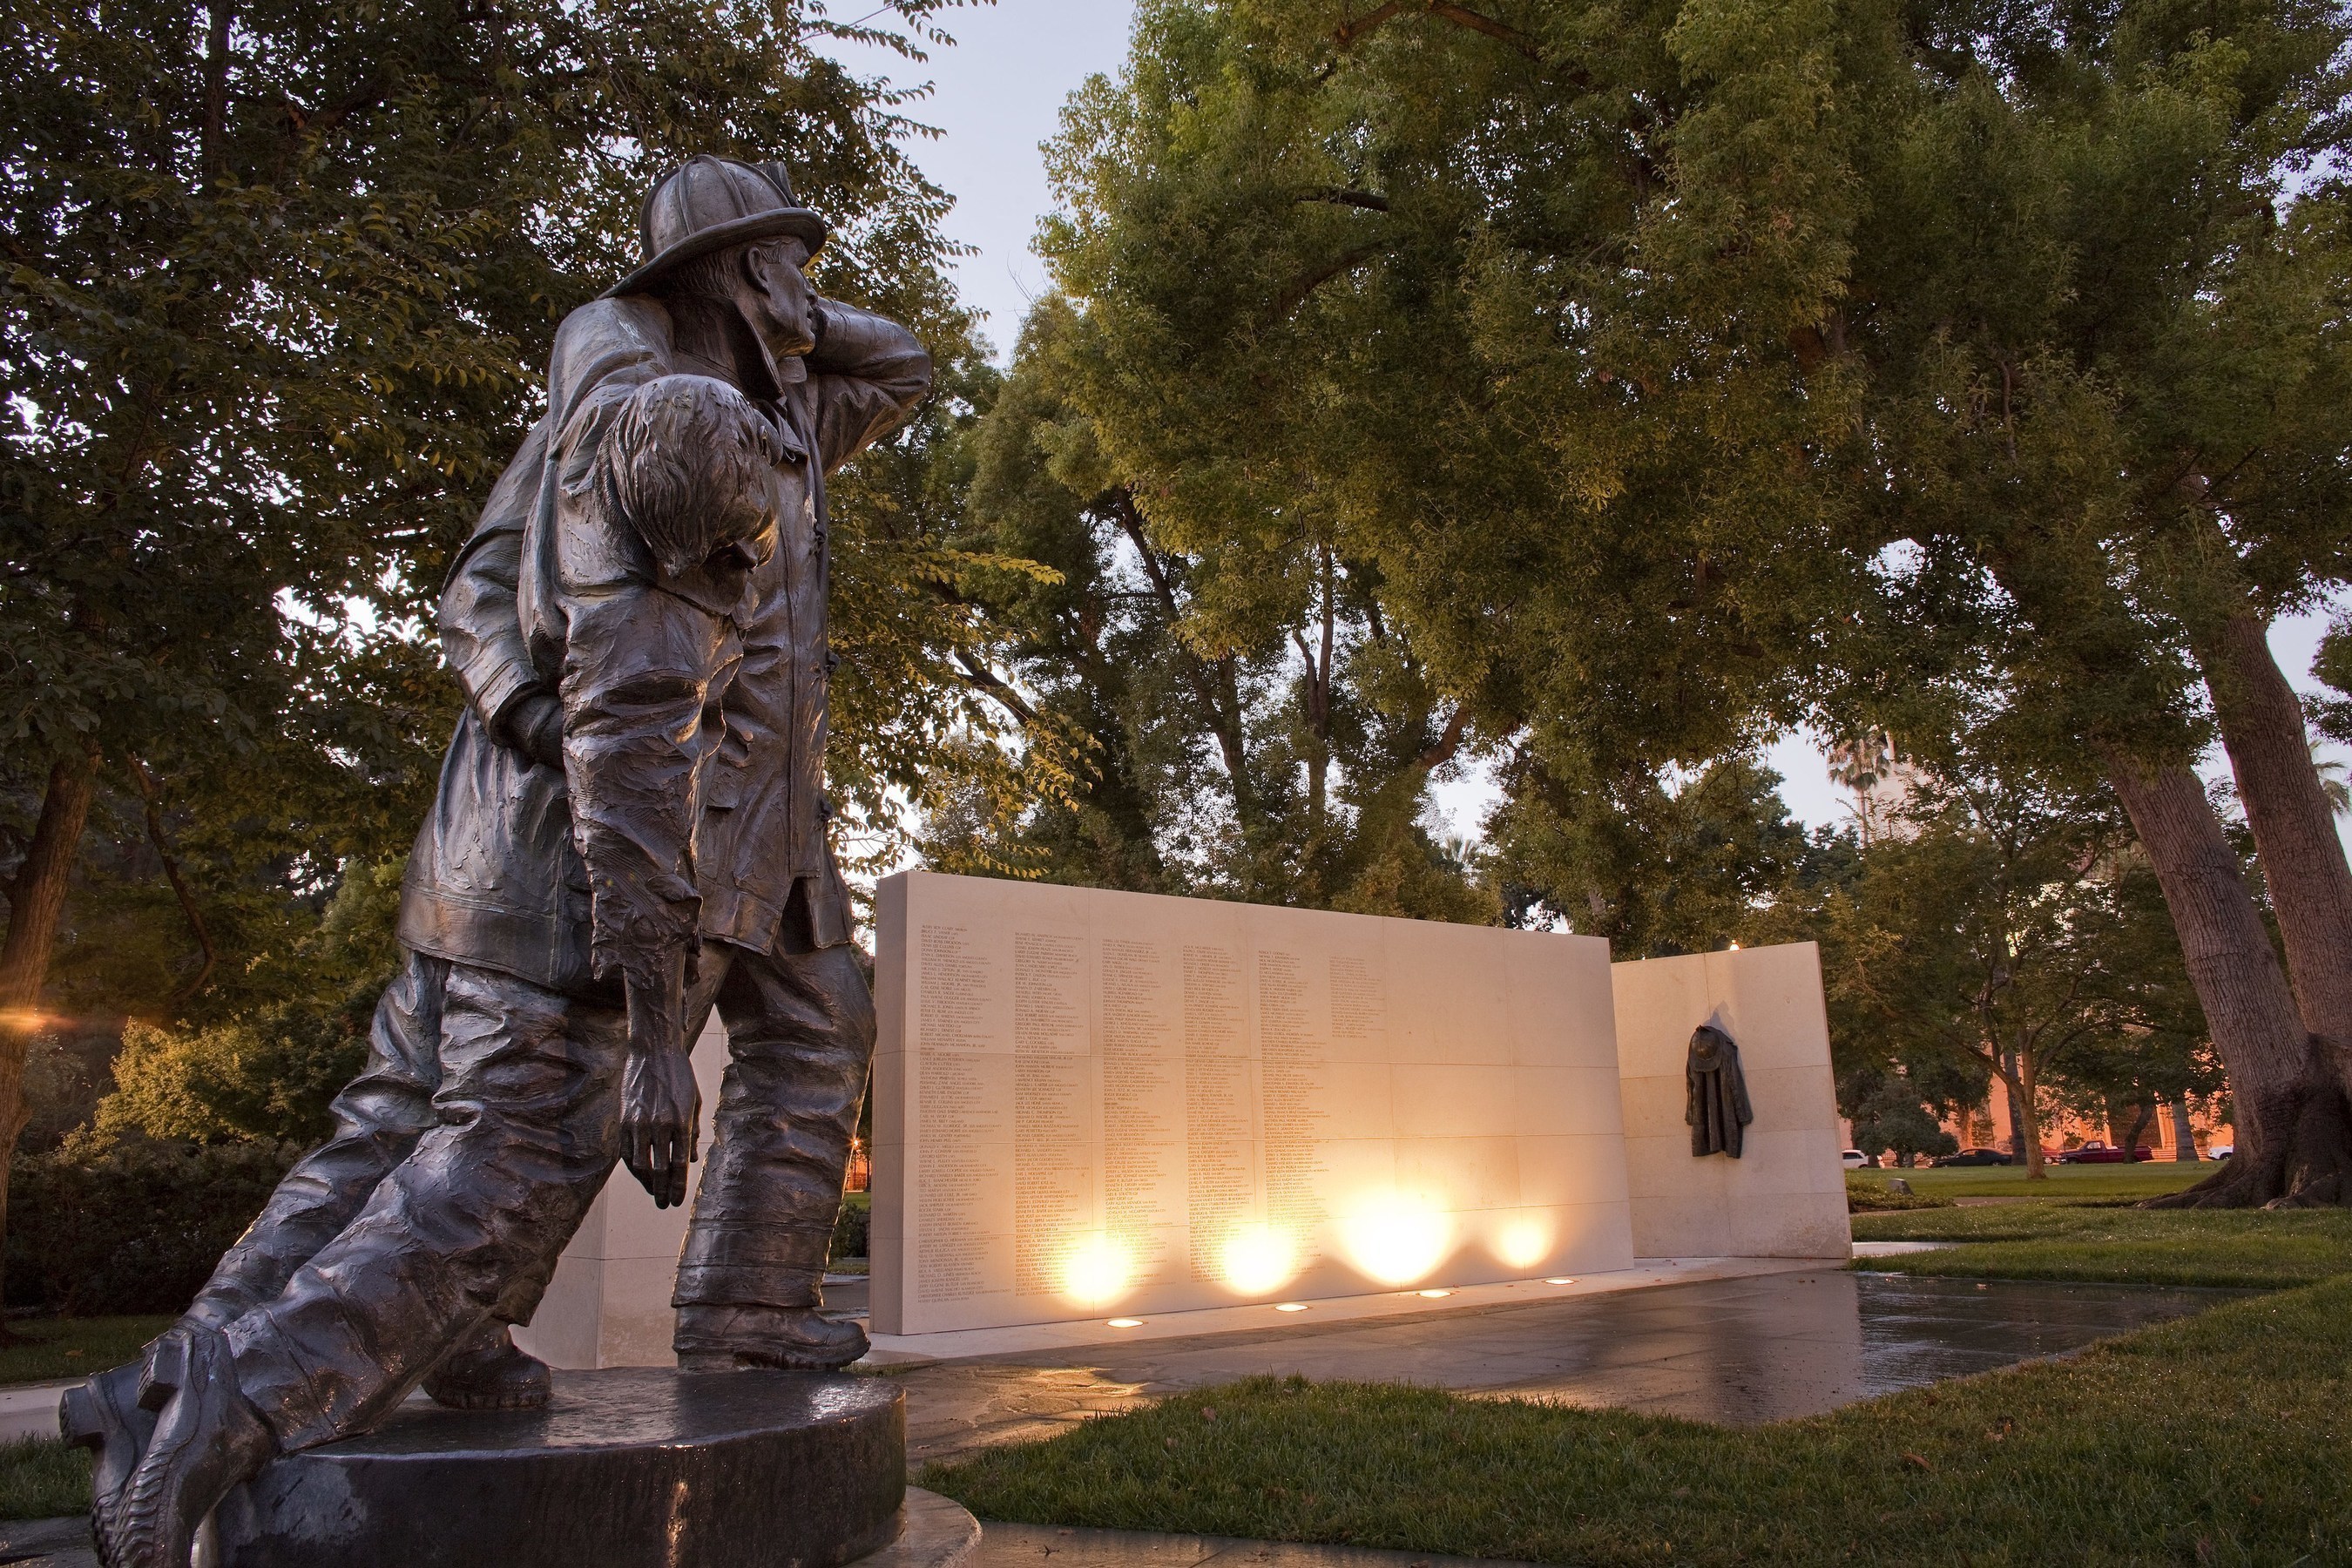 The California Firefighters Memorial in Sacramento honors nearly 1,300 firefighters who died in the line of duty. On Oct. 17, 16 names were added to the Memorial in a midday ceremony.